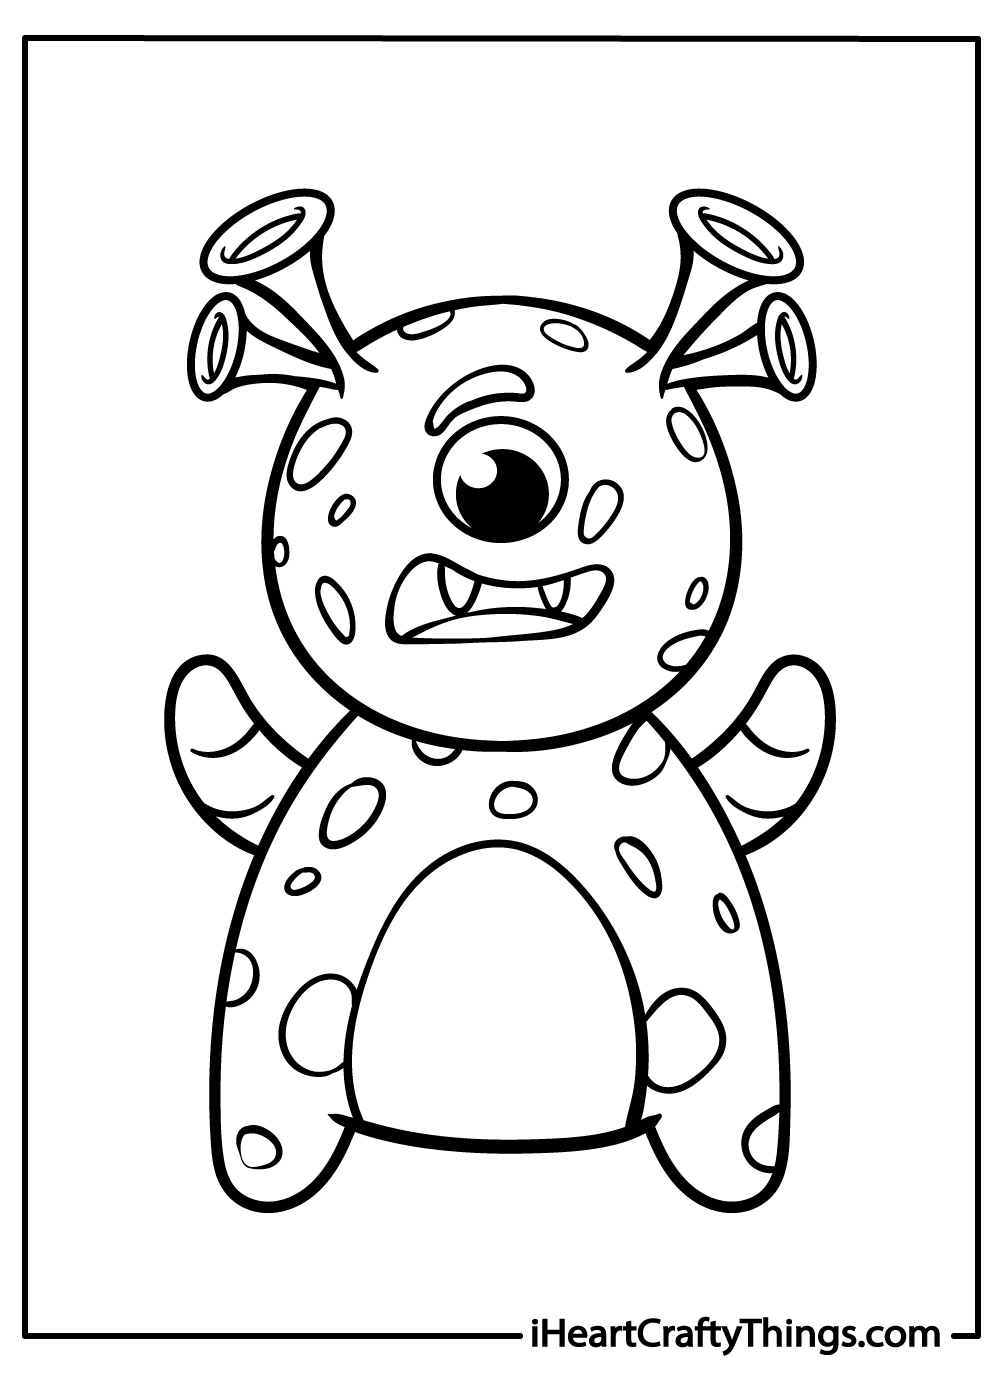 New Alien Coloring Pages for Kids